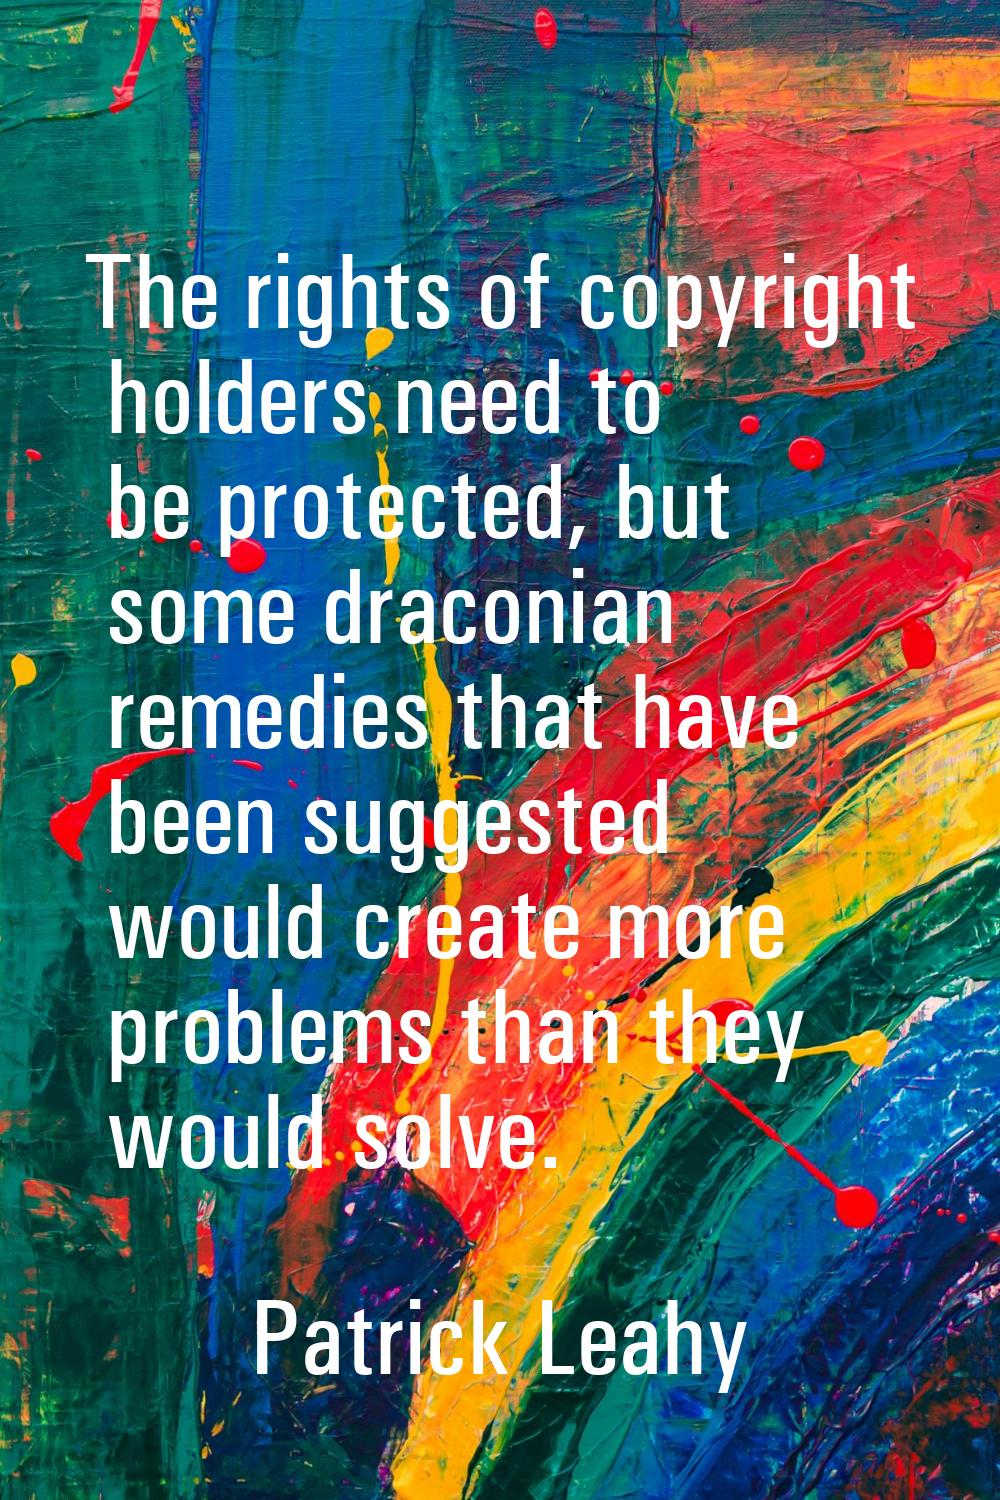 The rights of copyright holders need to be protected, but some draconian remedies that have been su